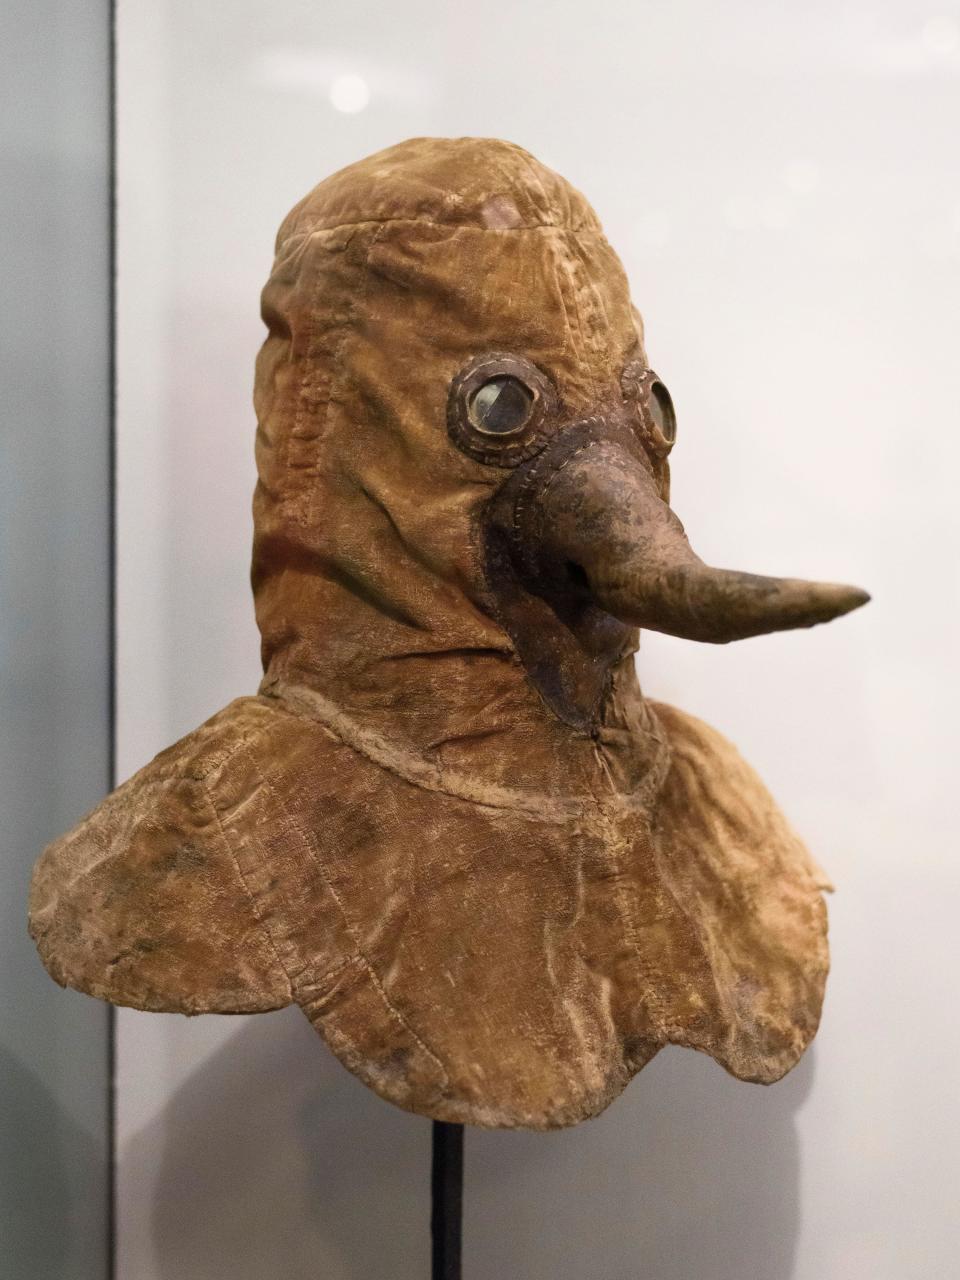 A velvety-looking mask that goes over the head and covers the shoulders, with a conelike beak nose and plastic holes for the eyes